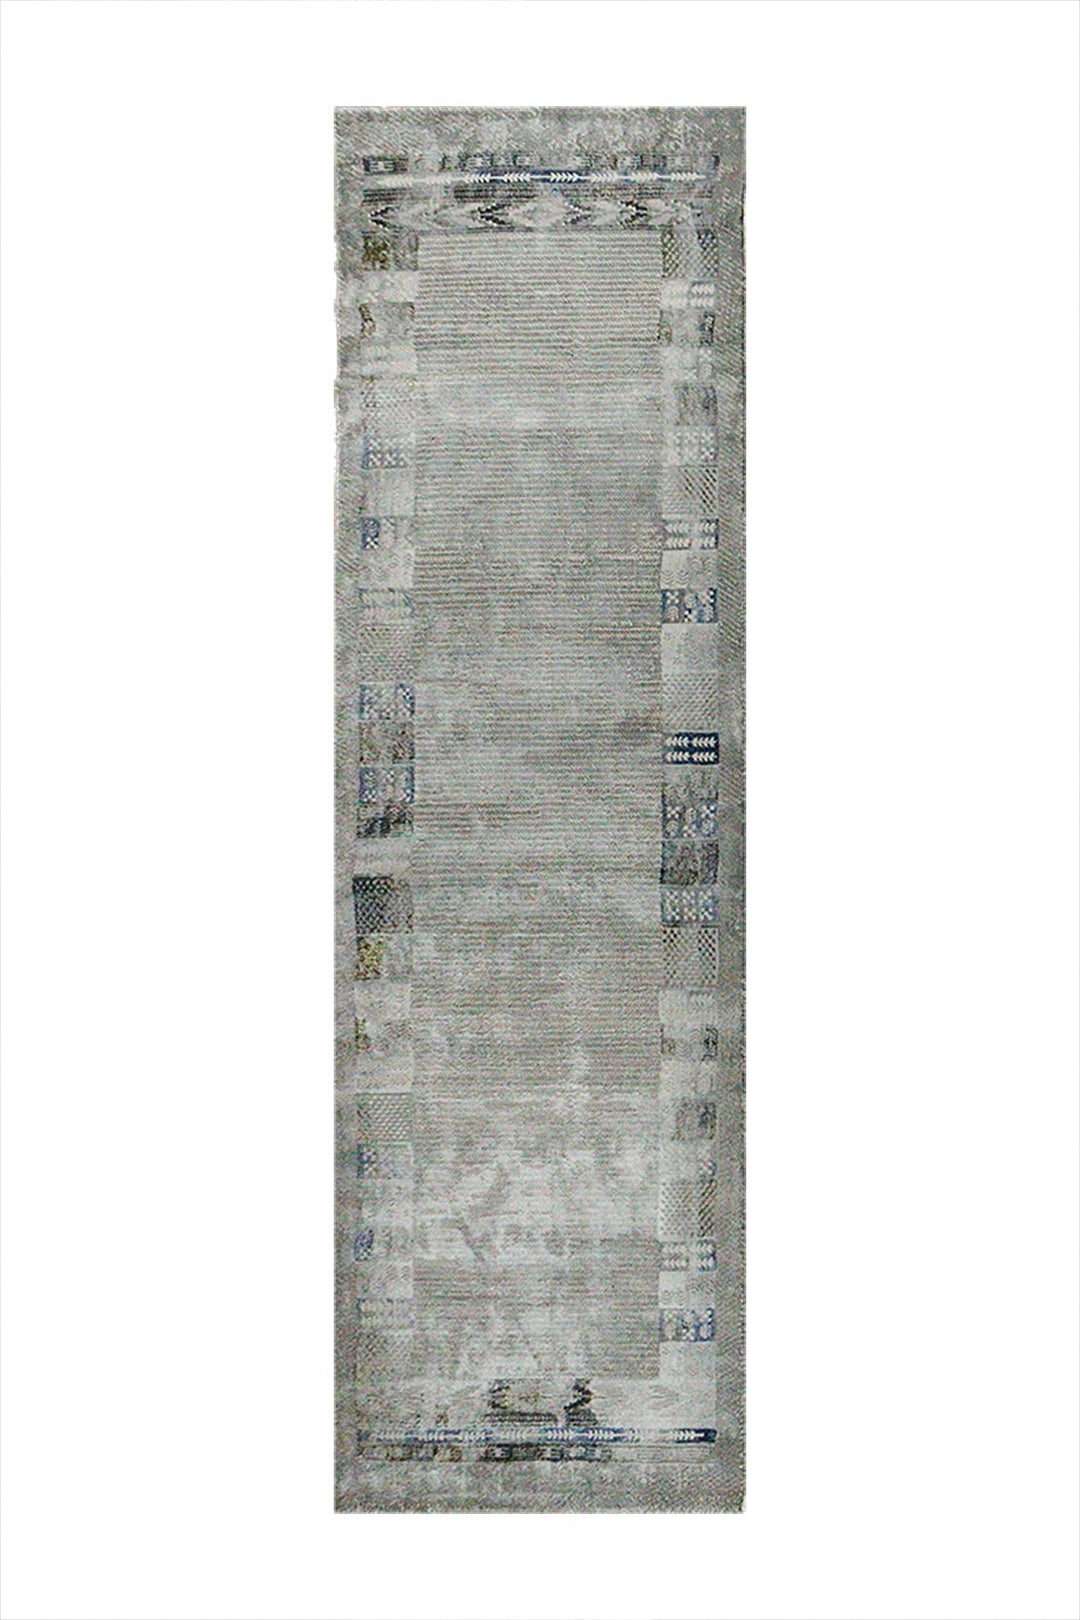 Turkish Modern Festival 1 Rug - 3.2 x 9.8 FT - Gray - Sleek and Minimalist for Chic Interiors - V Surfaces